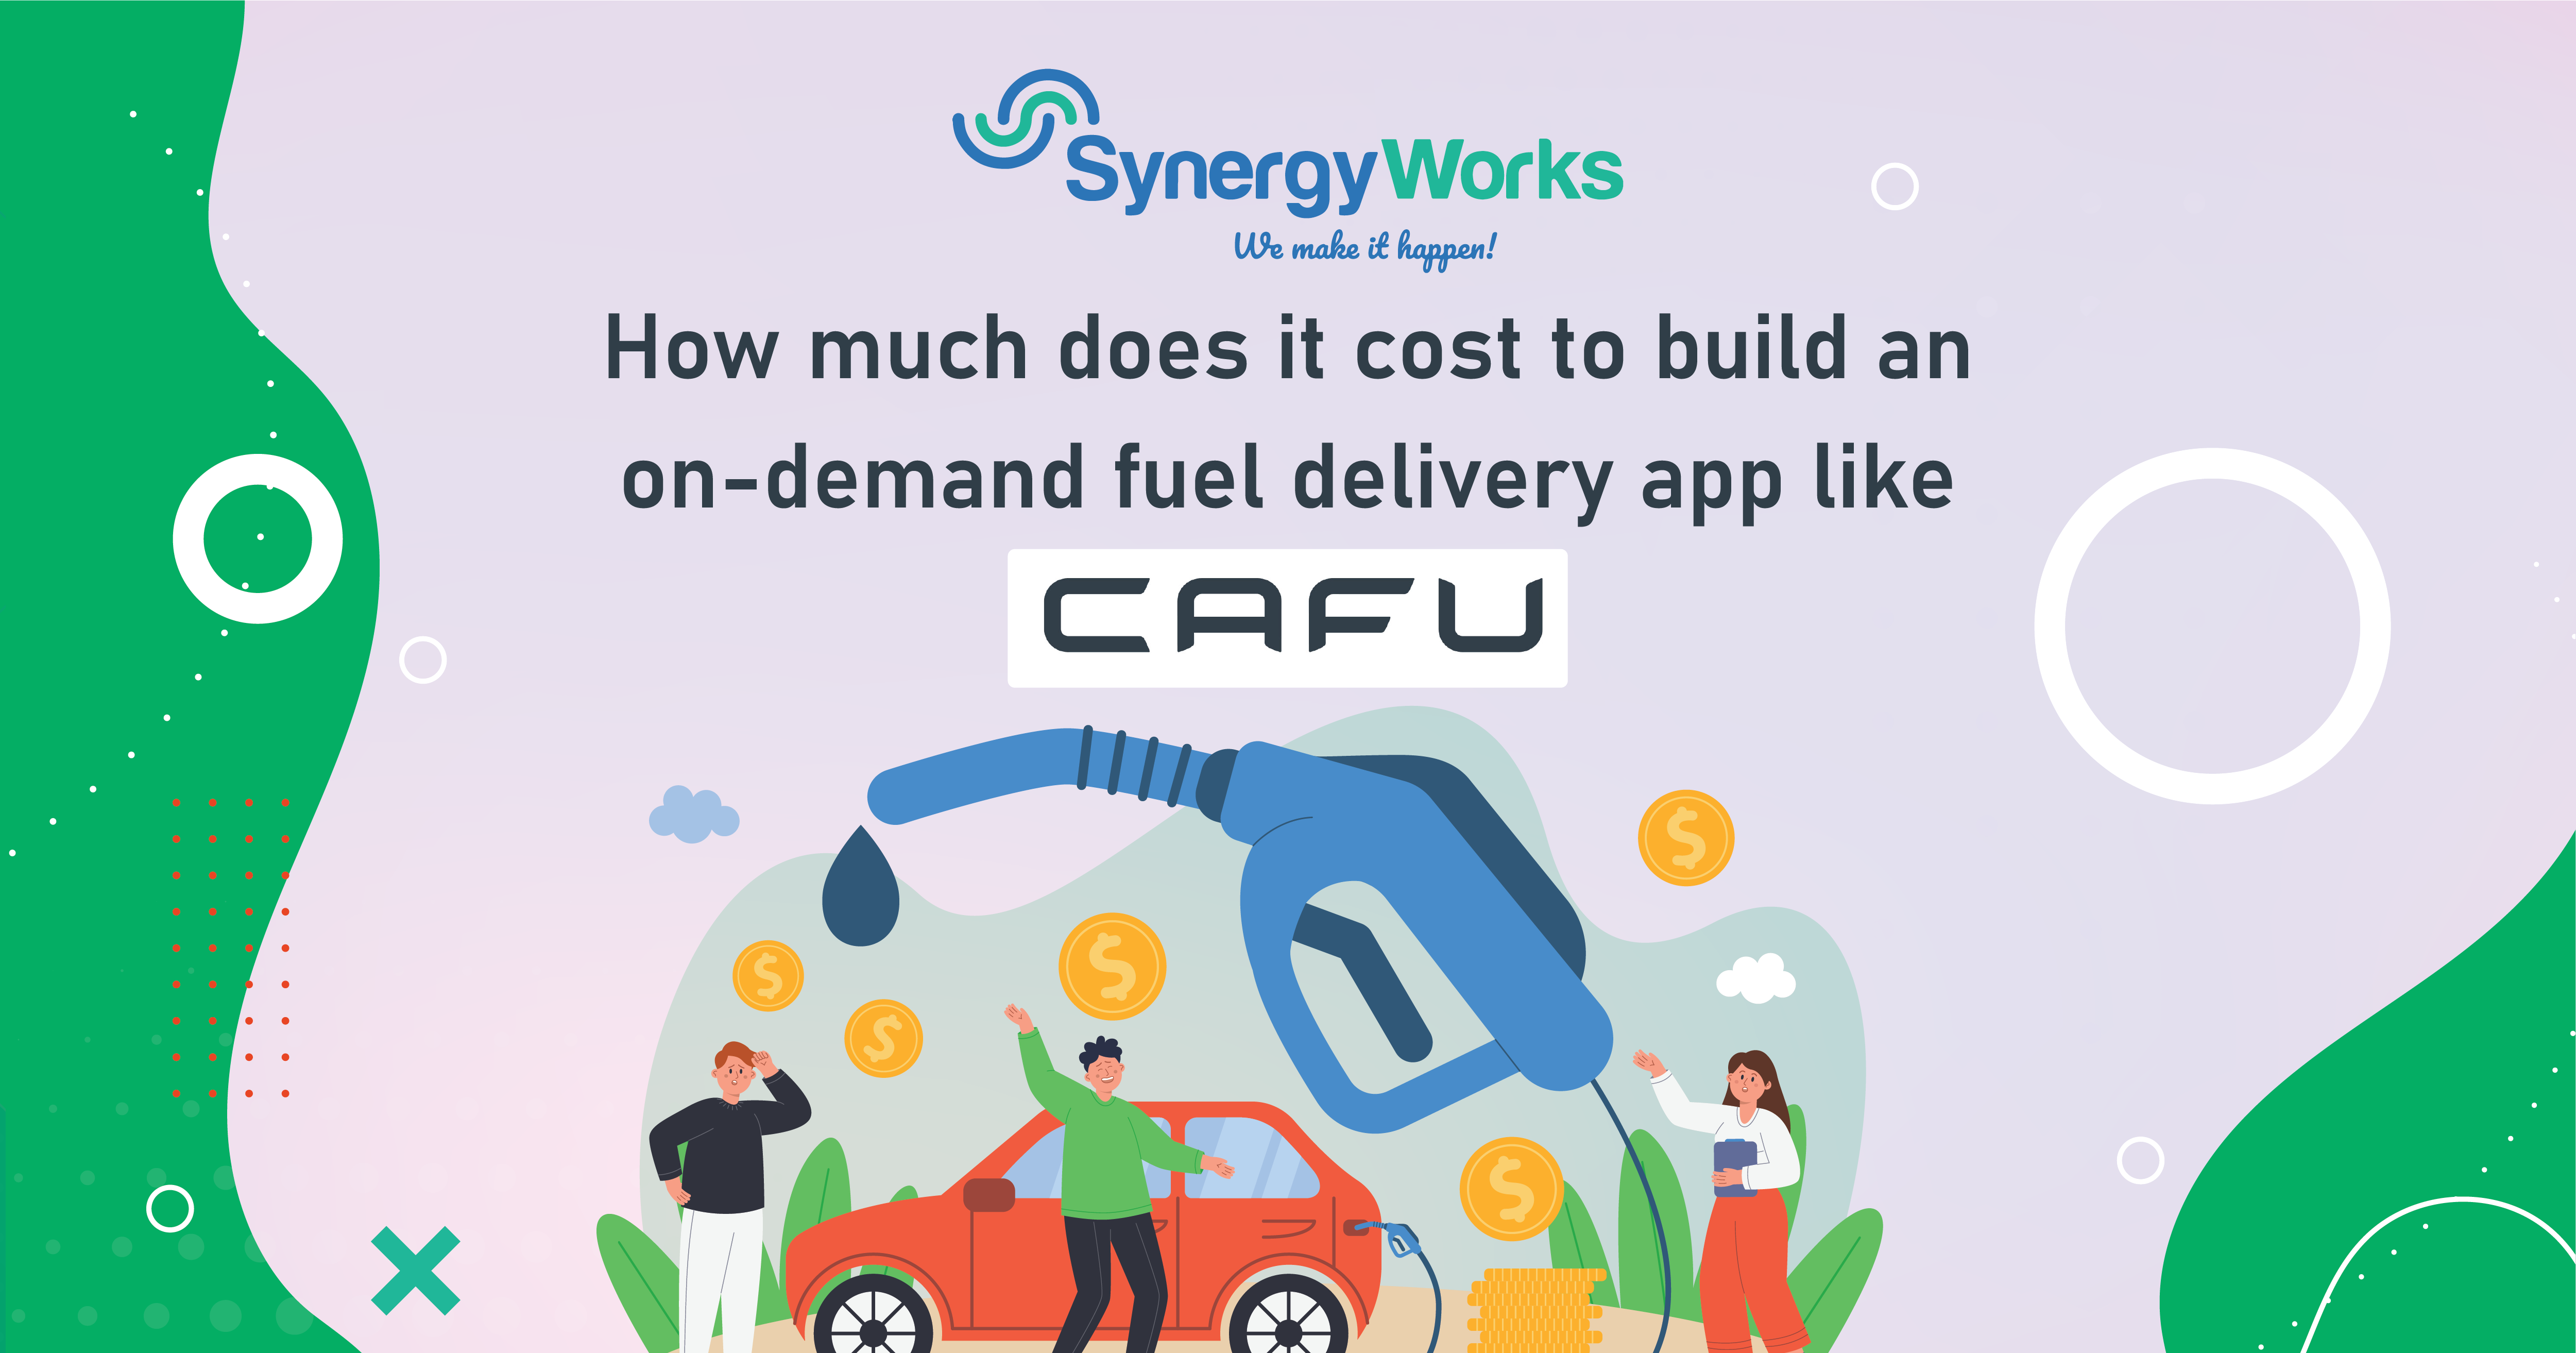 Cost To Build An On-Demand Fuel Delivery App Like CAFU